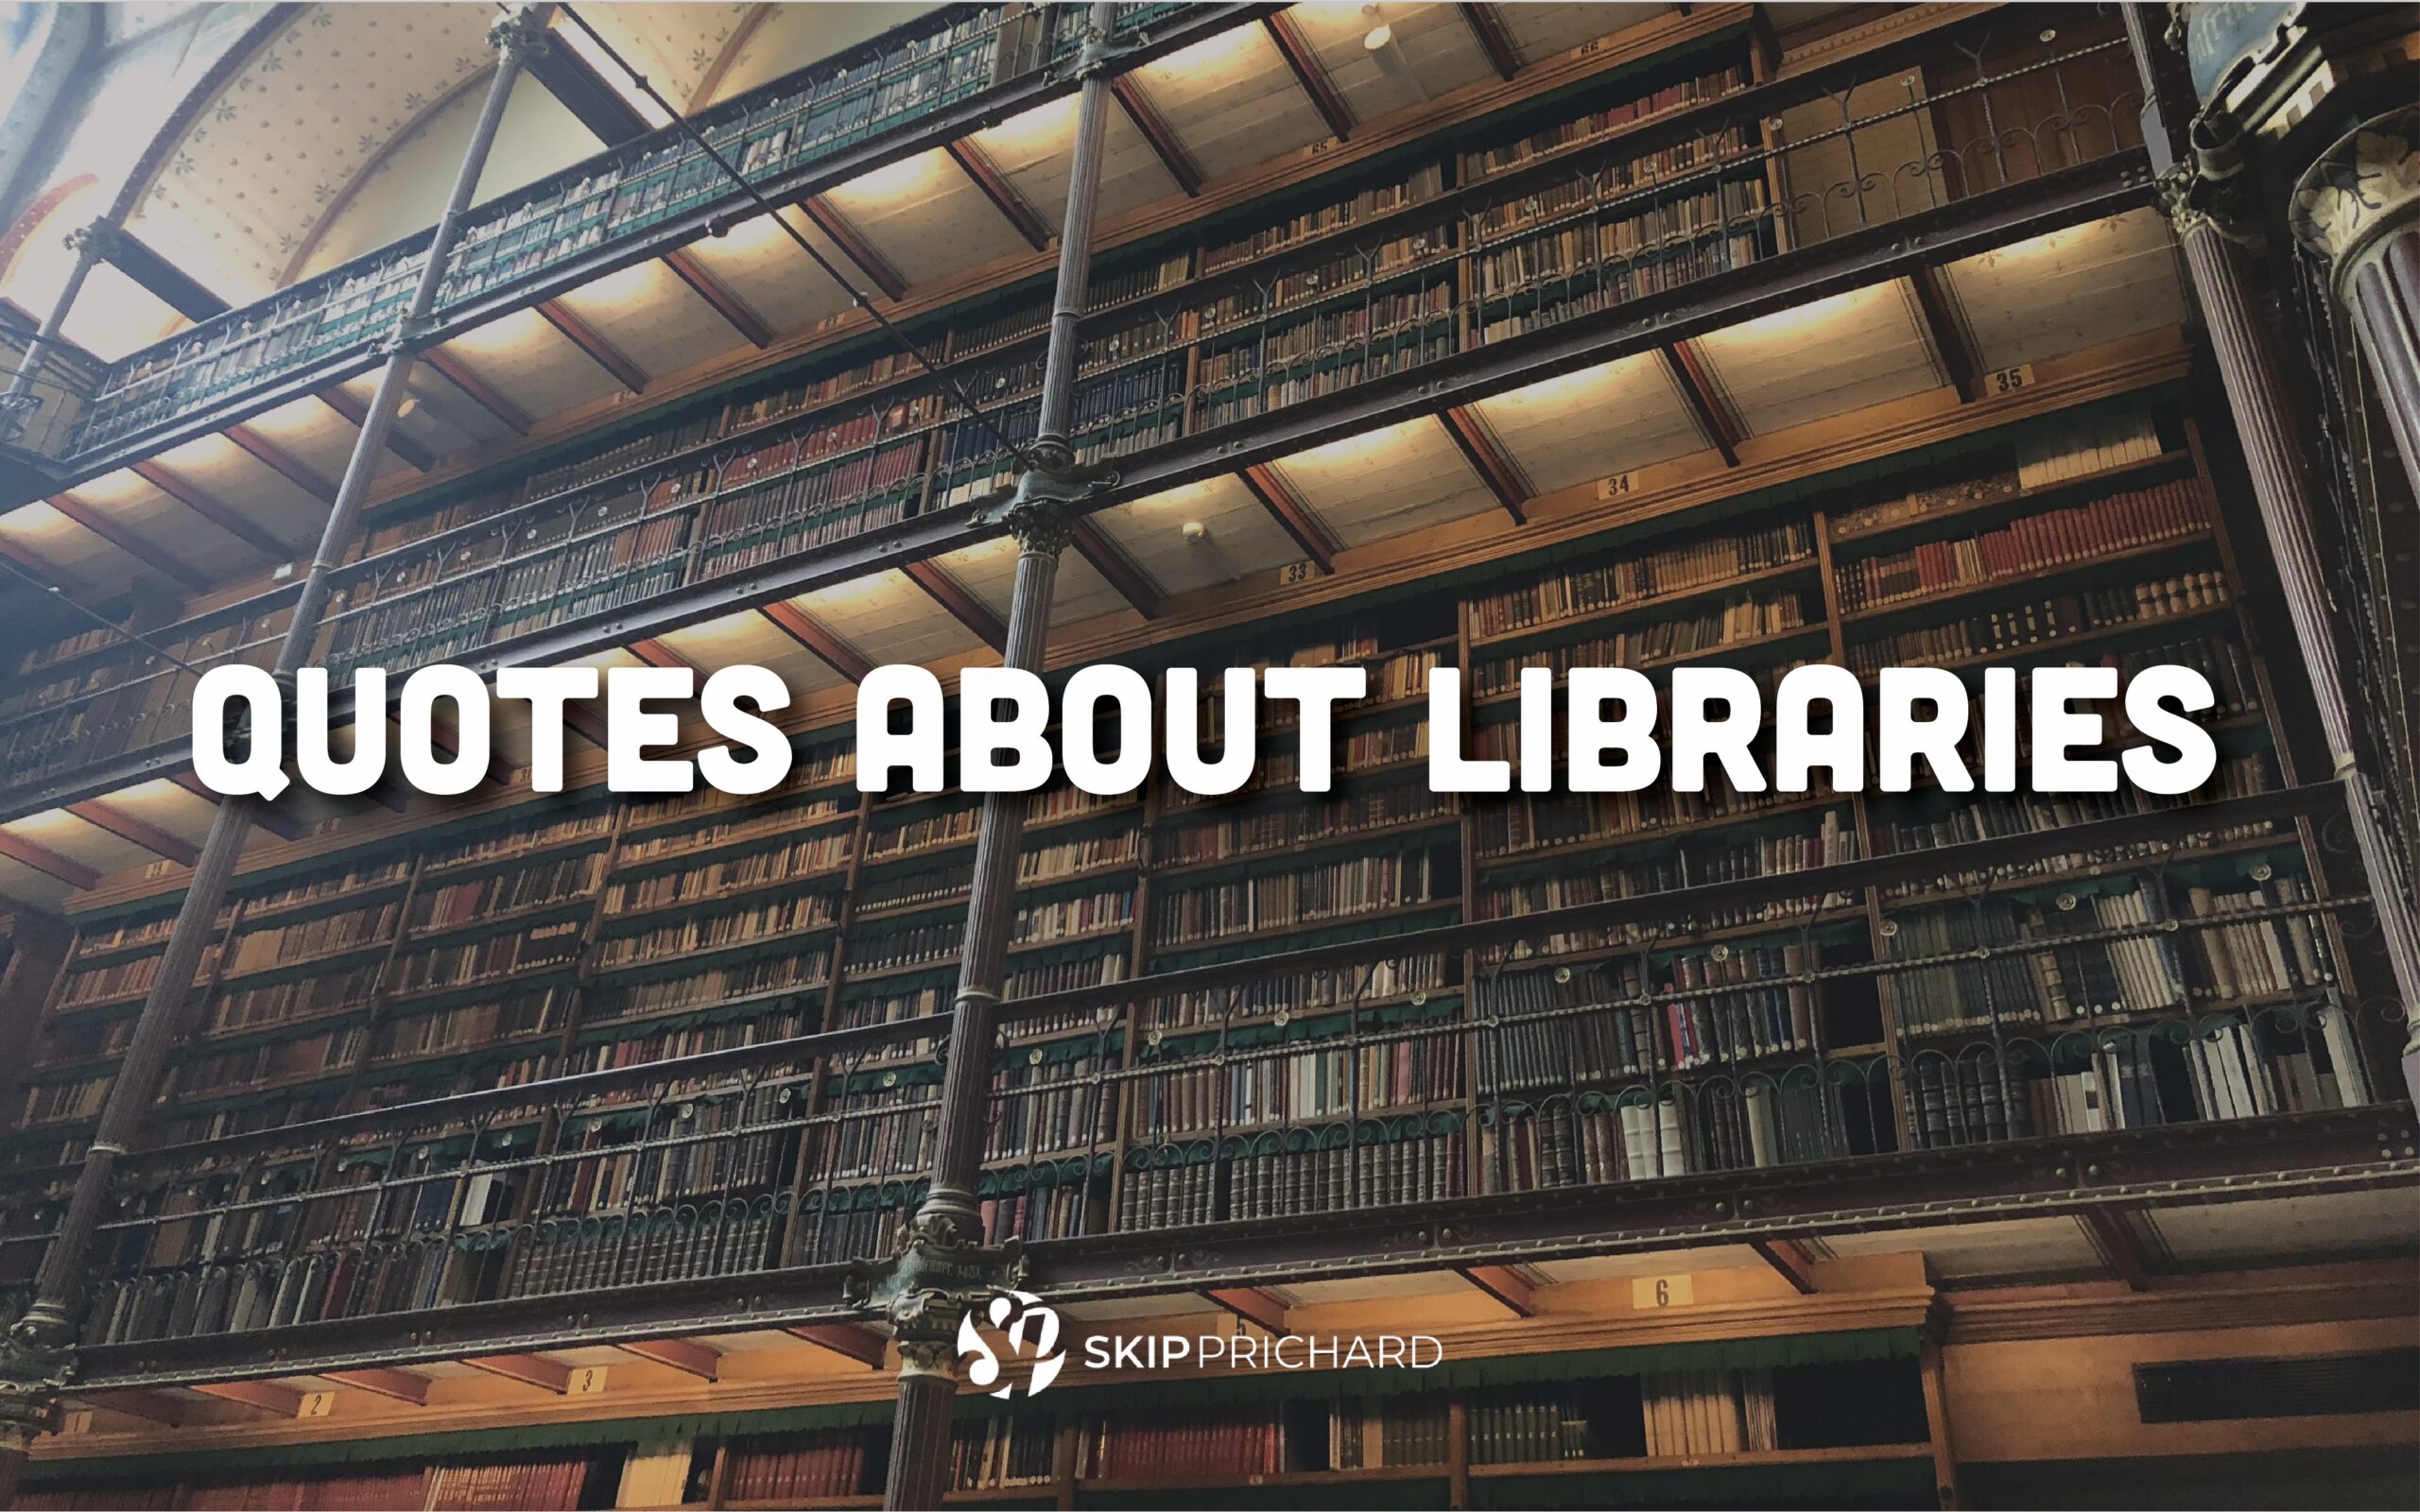 29 Quotes about Libraries